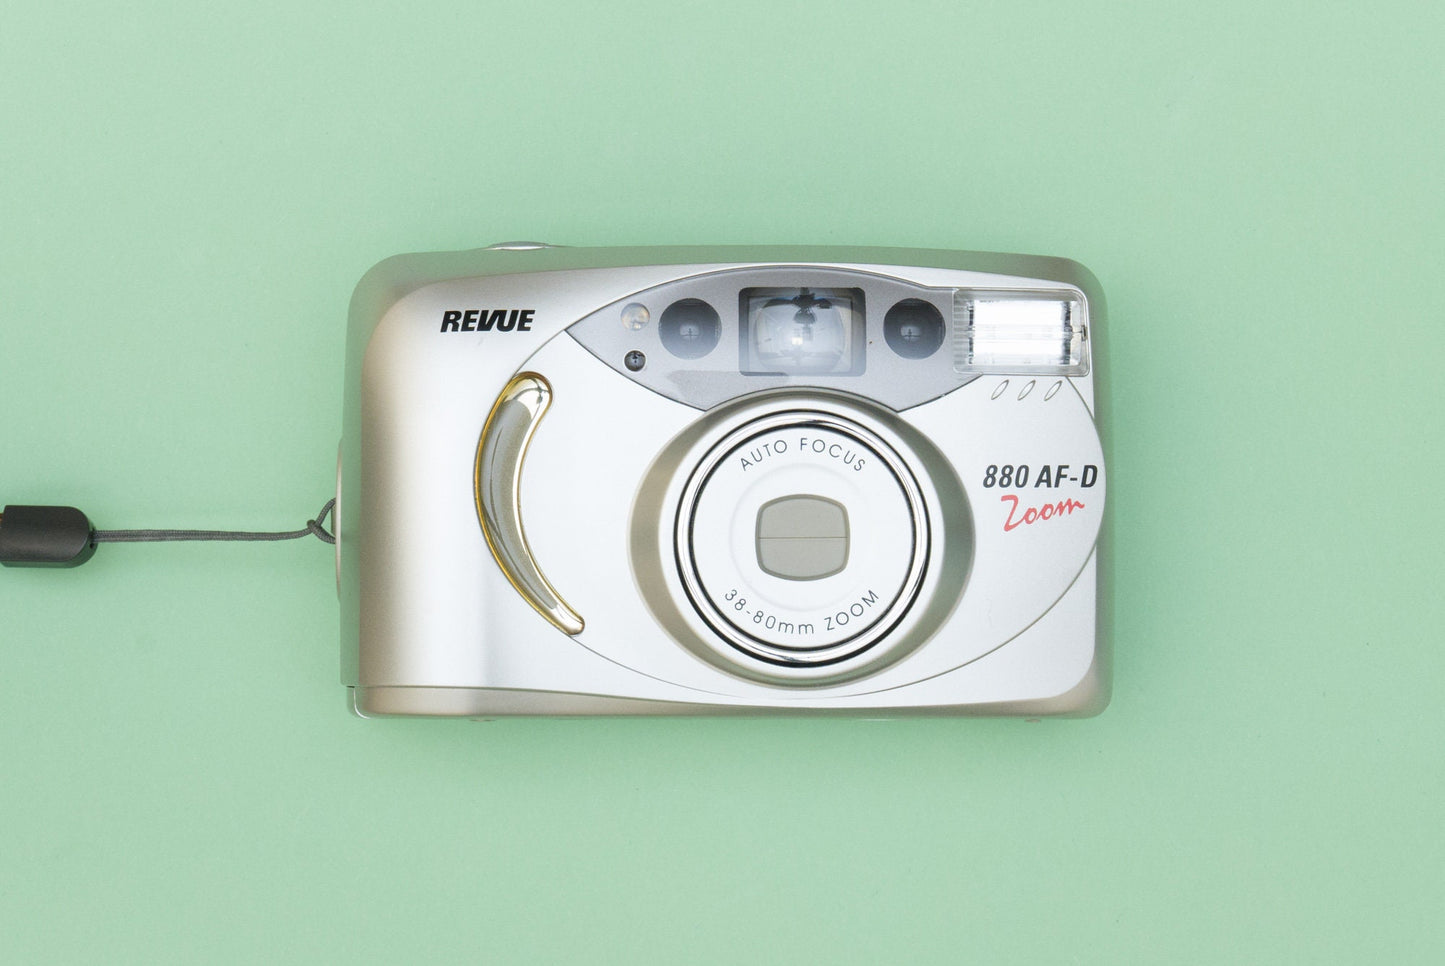 Revue 880 AF-D Zoom Compact Point and Shoot 35mm Film Camera